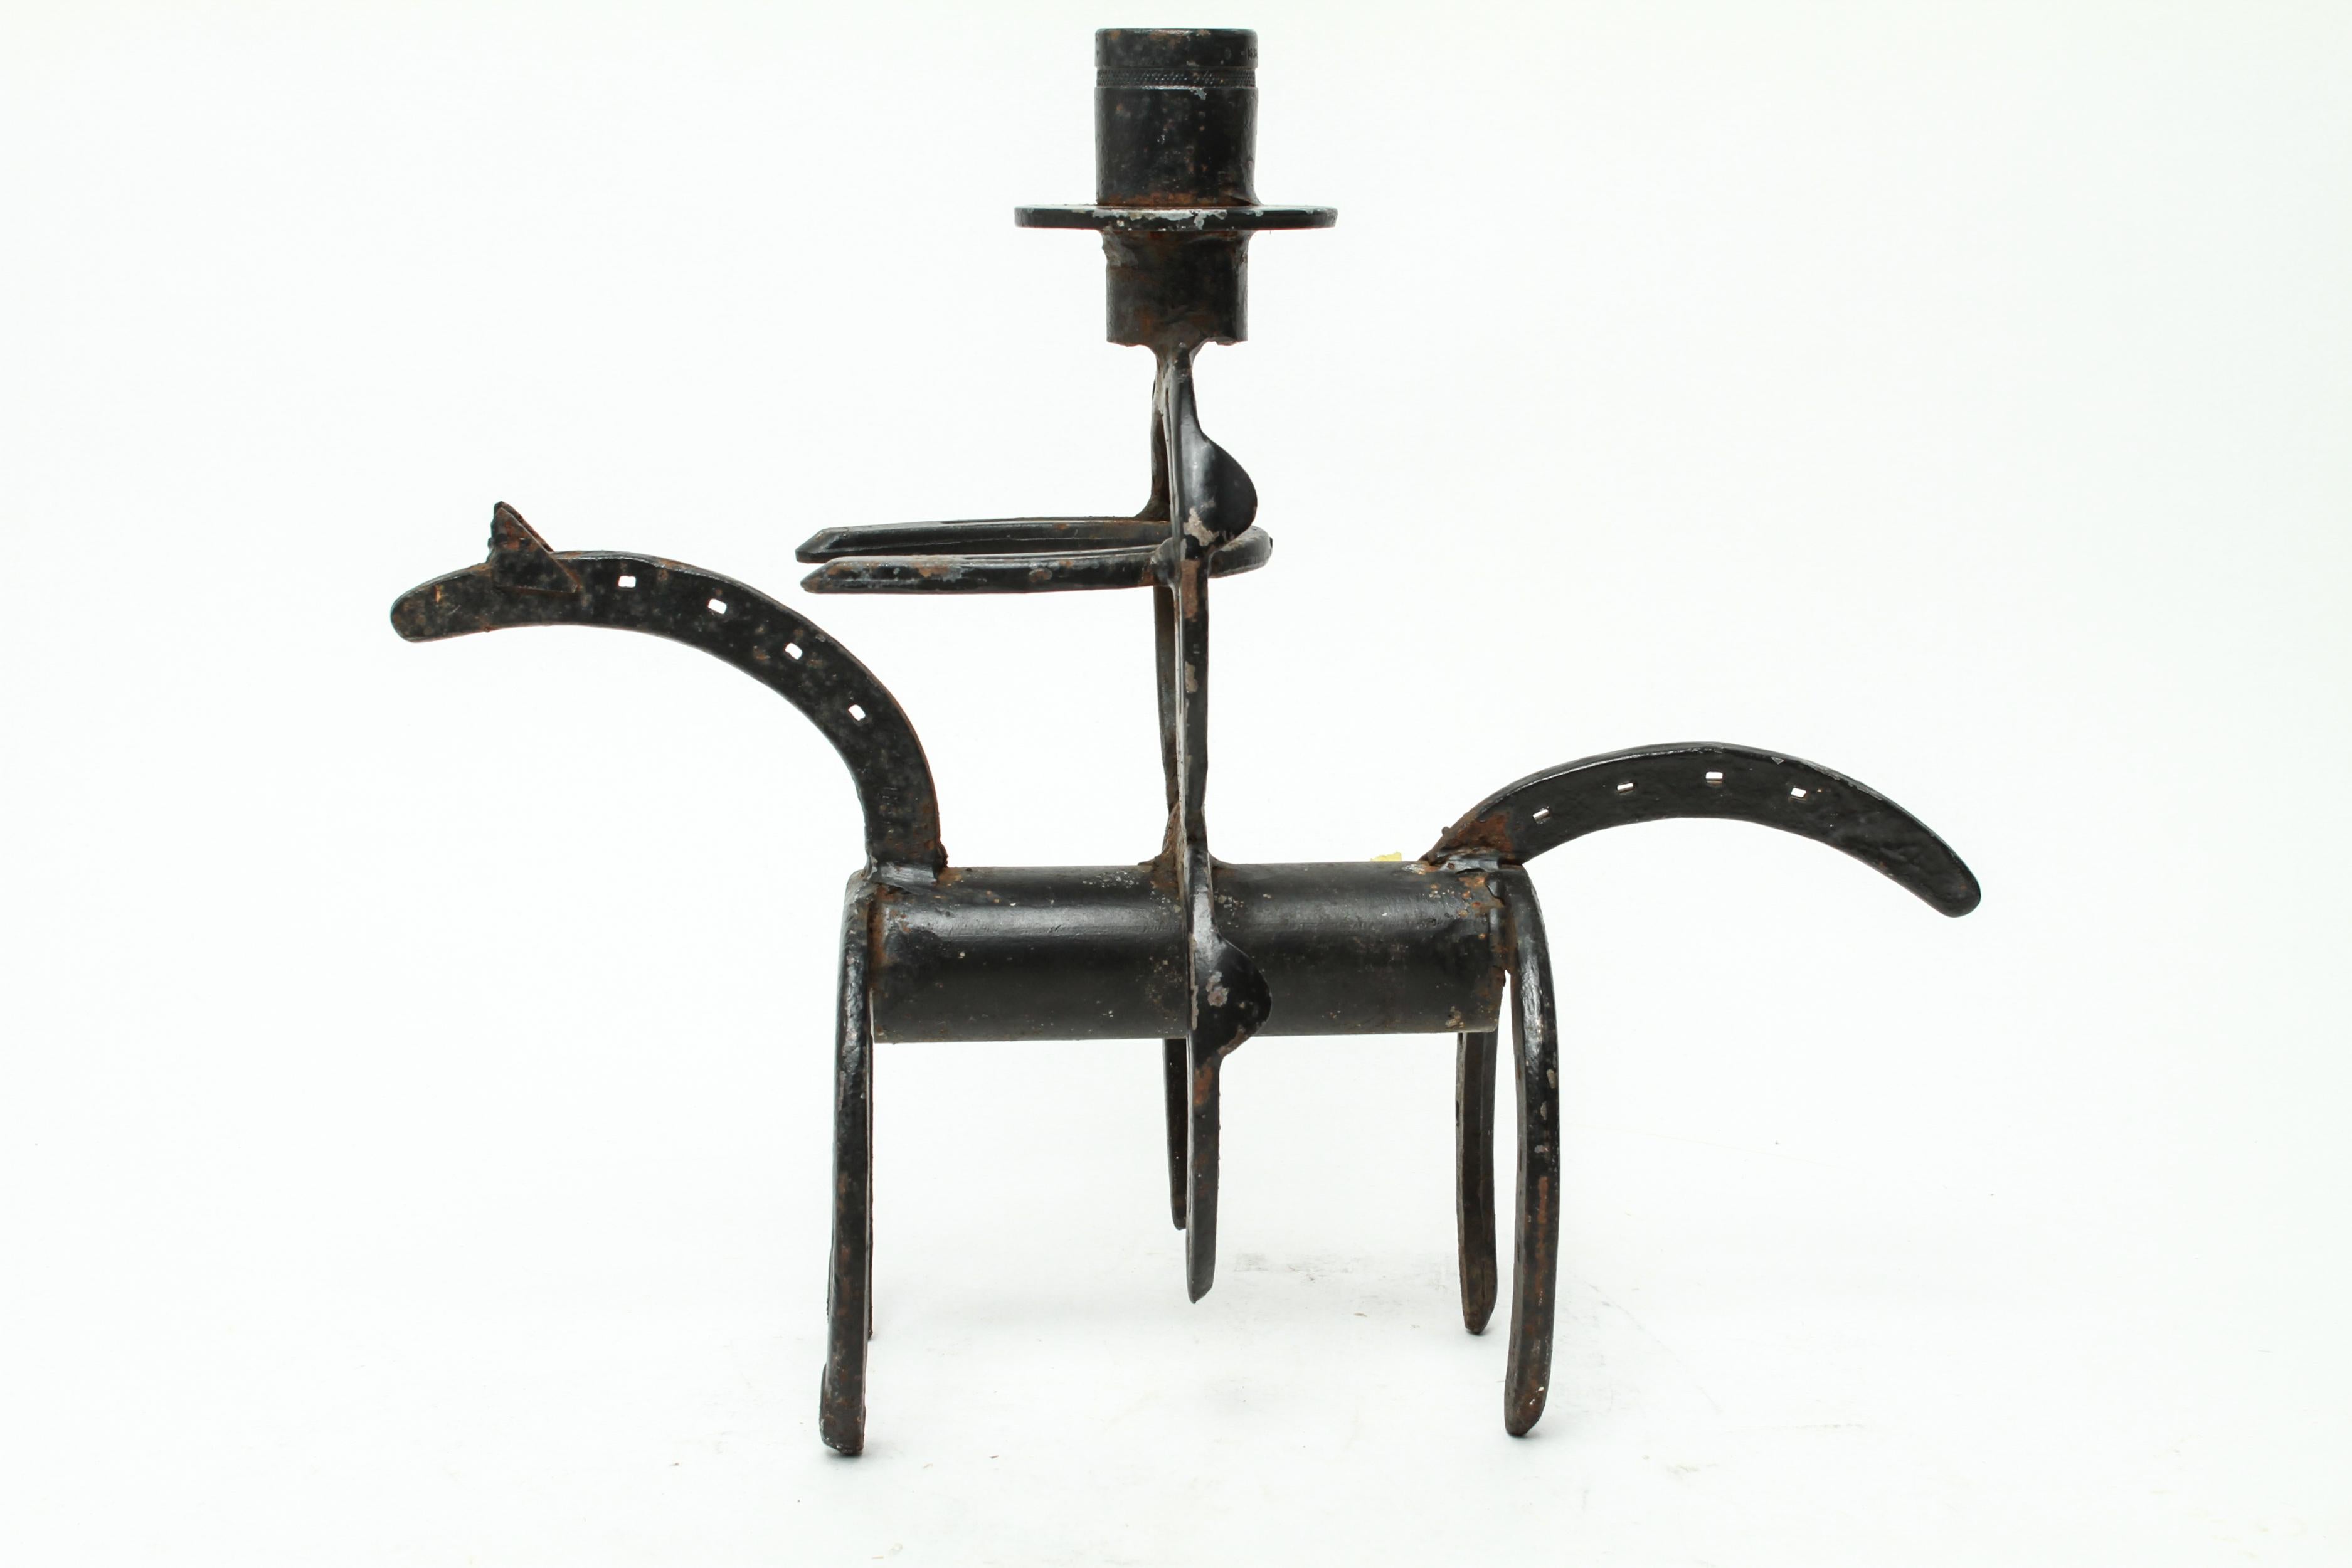 Folk Art welded sculpture in horseshoe iron in the shape of a man riding a horse. The piece is in great vintage condition with minor age-appropriate wear.